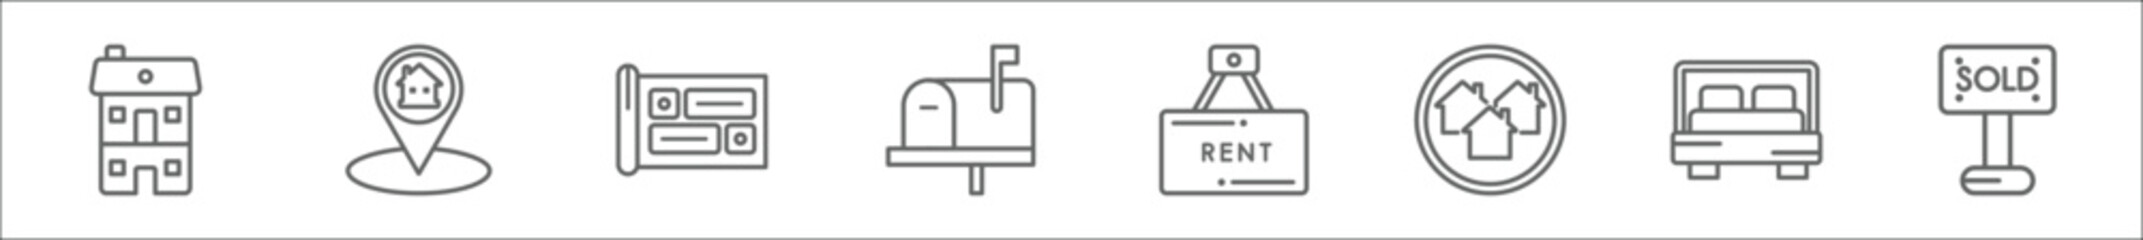 outline set of real estate line icons. linear vector icons such as duplex, real state, blueprint, mailbox, rent, houses, bedroom, sold